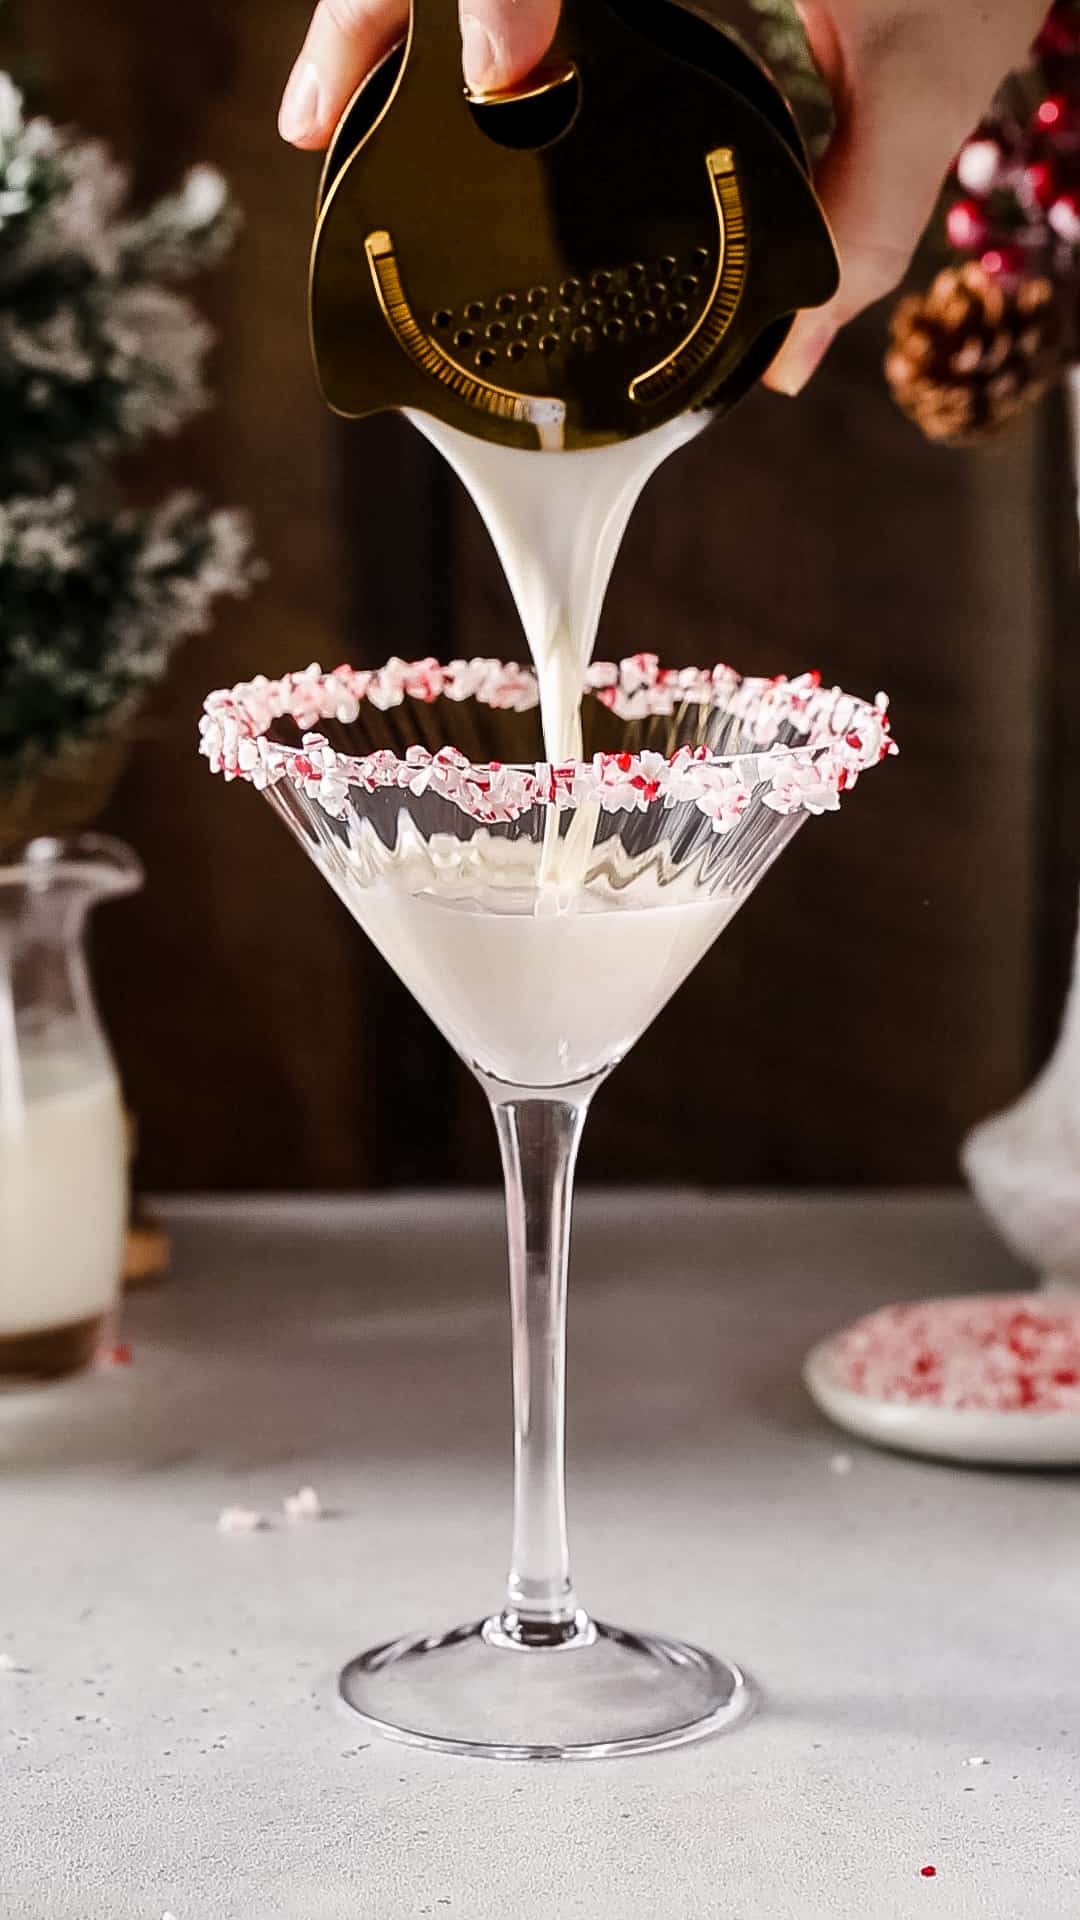 Hand pouring a white cocktail into a martini glass with a crushed candy cane rim.